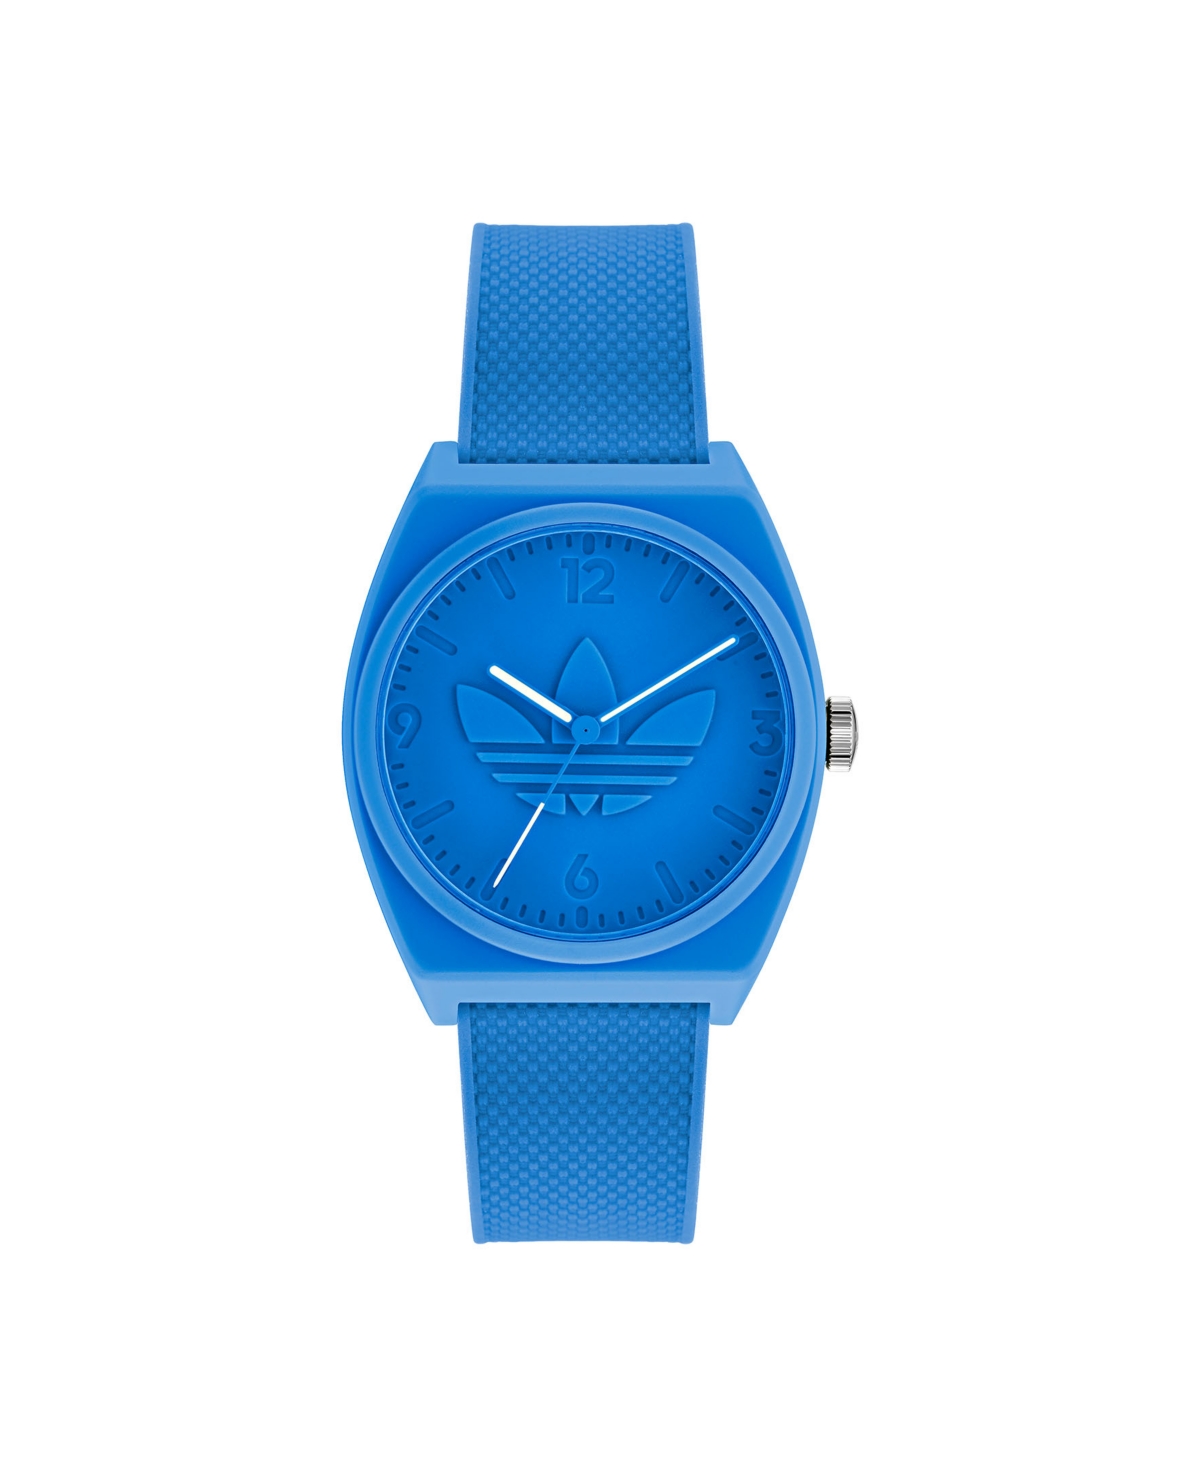 Unisex Three Hand Project Two Blue Resin Strap Watch 38mm - Blue